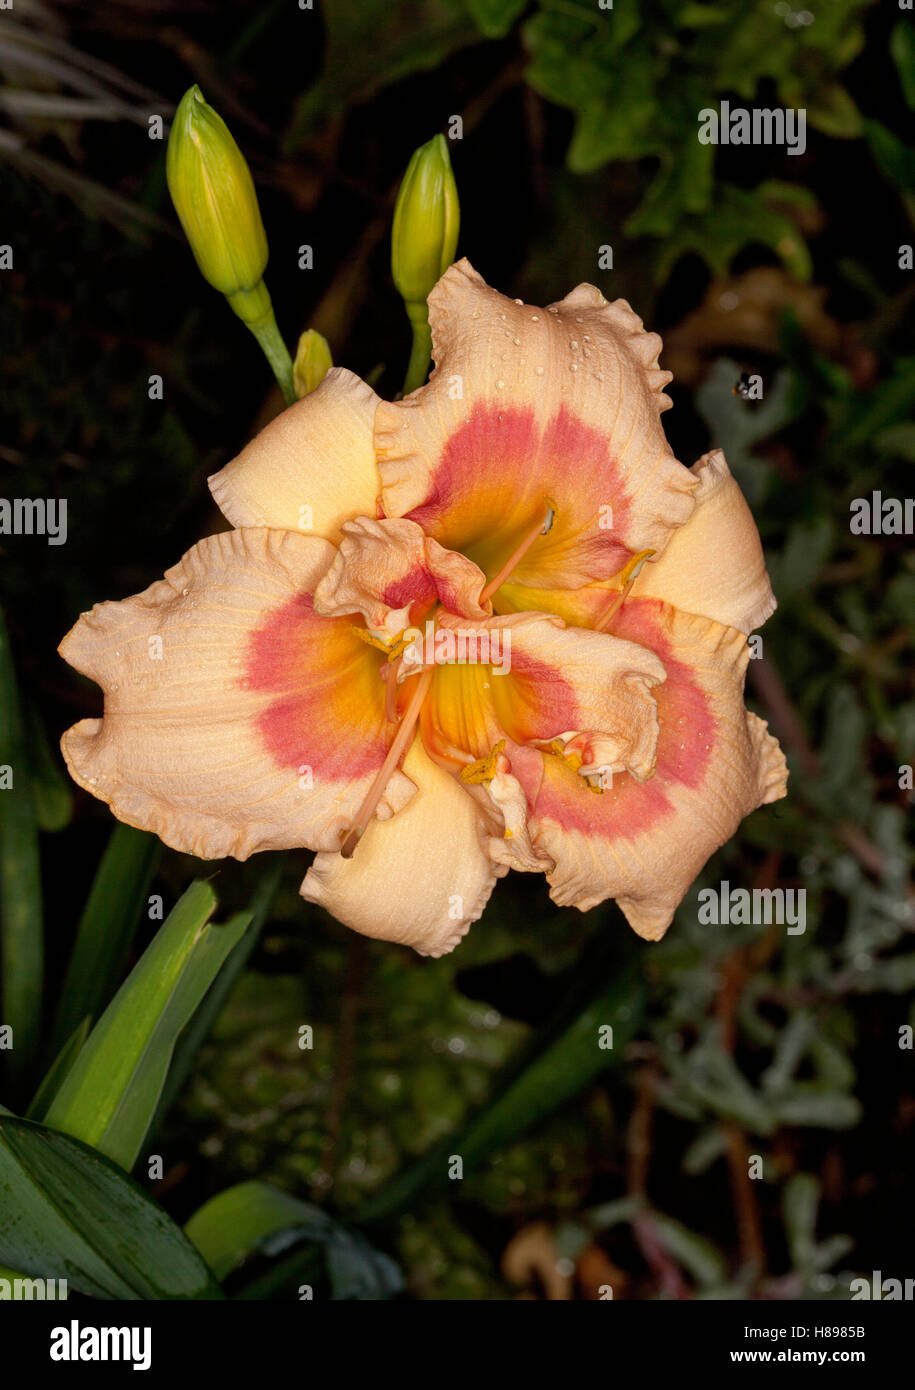 Spectacular & unusual apricot & dark orange semi-double flower with frilly petals of daylily '42nd street' on dark background Stock Photo